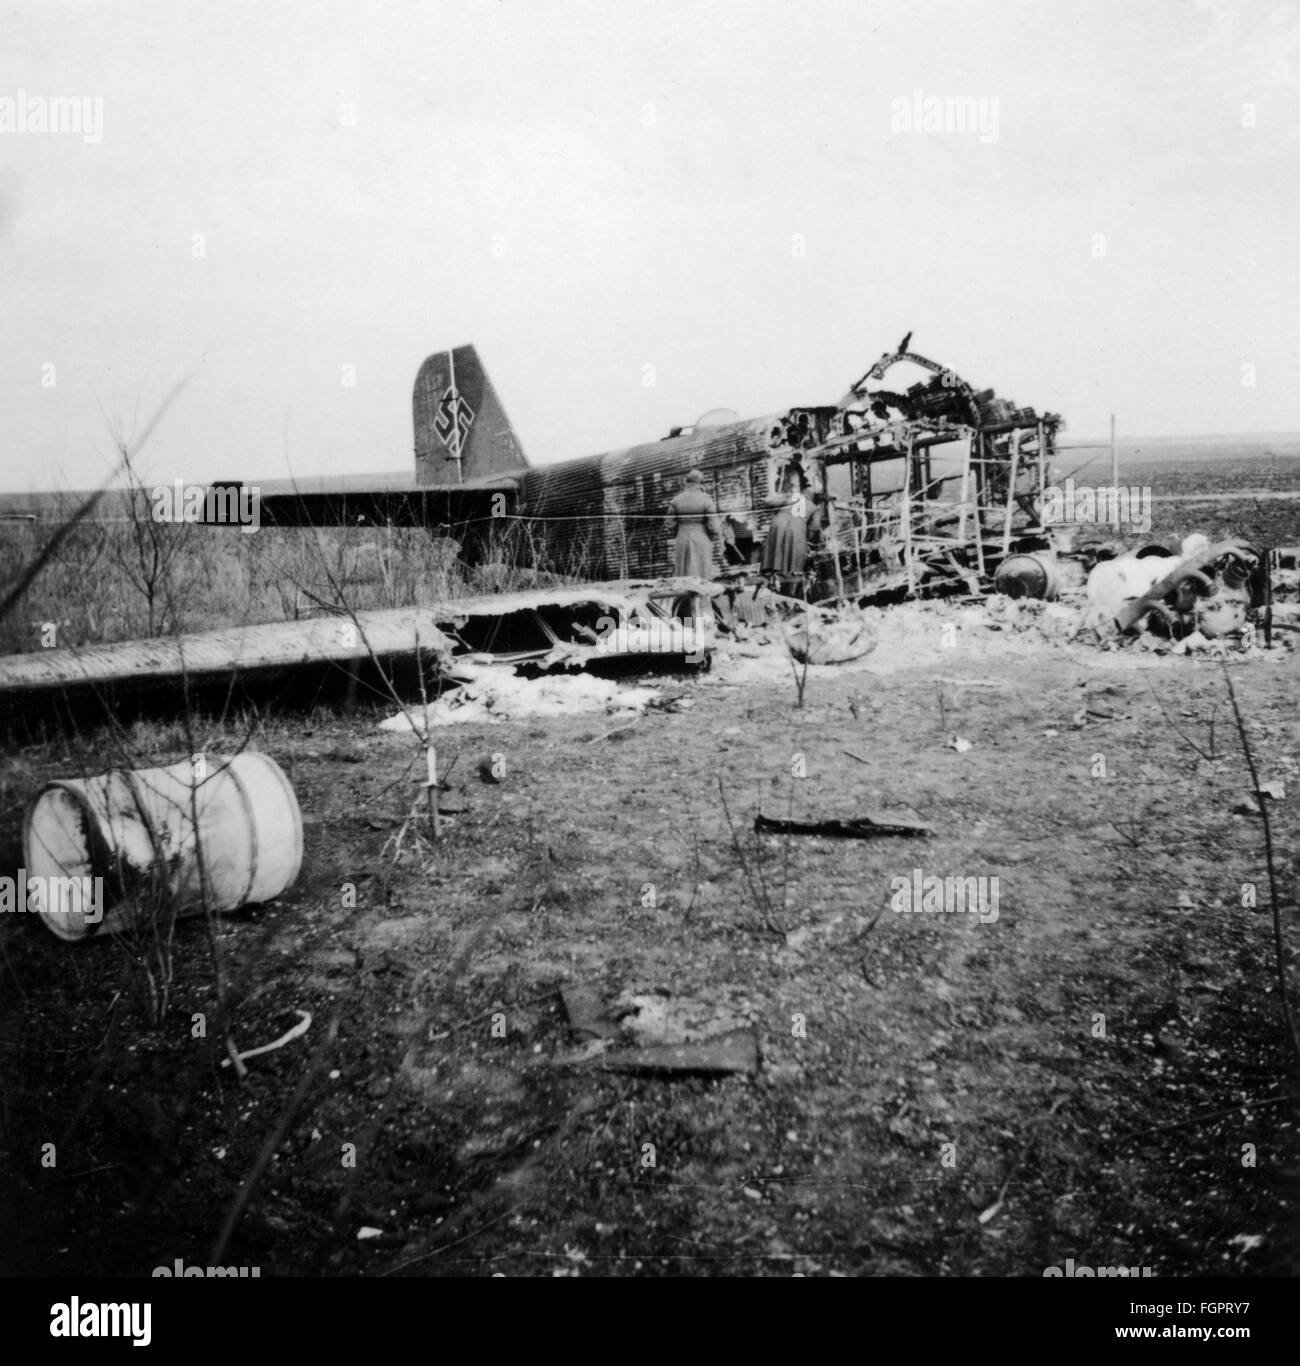 Second World War / WWII, Soviet Union, summer 1941, destroyed German transport aircraft Junkers Ju 52 on a field in the Ukraine, Additional-Rights-Clearences-Not Available Stock Photo